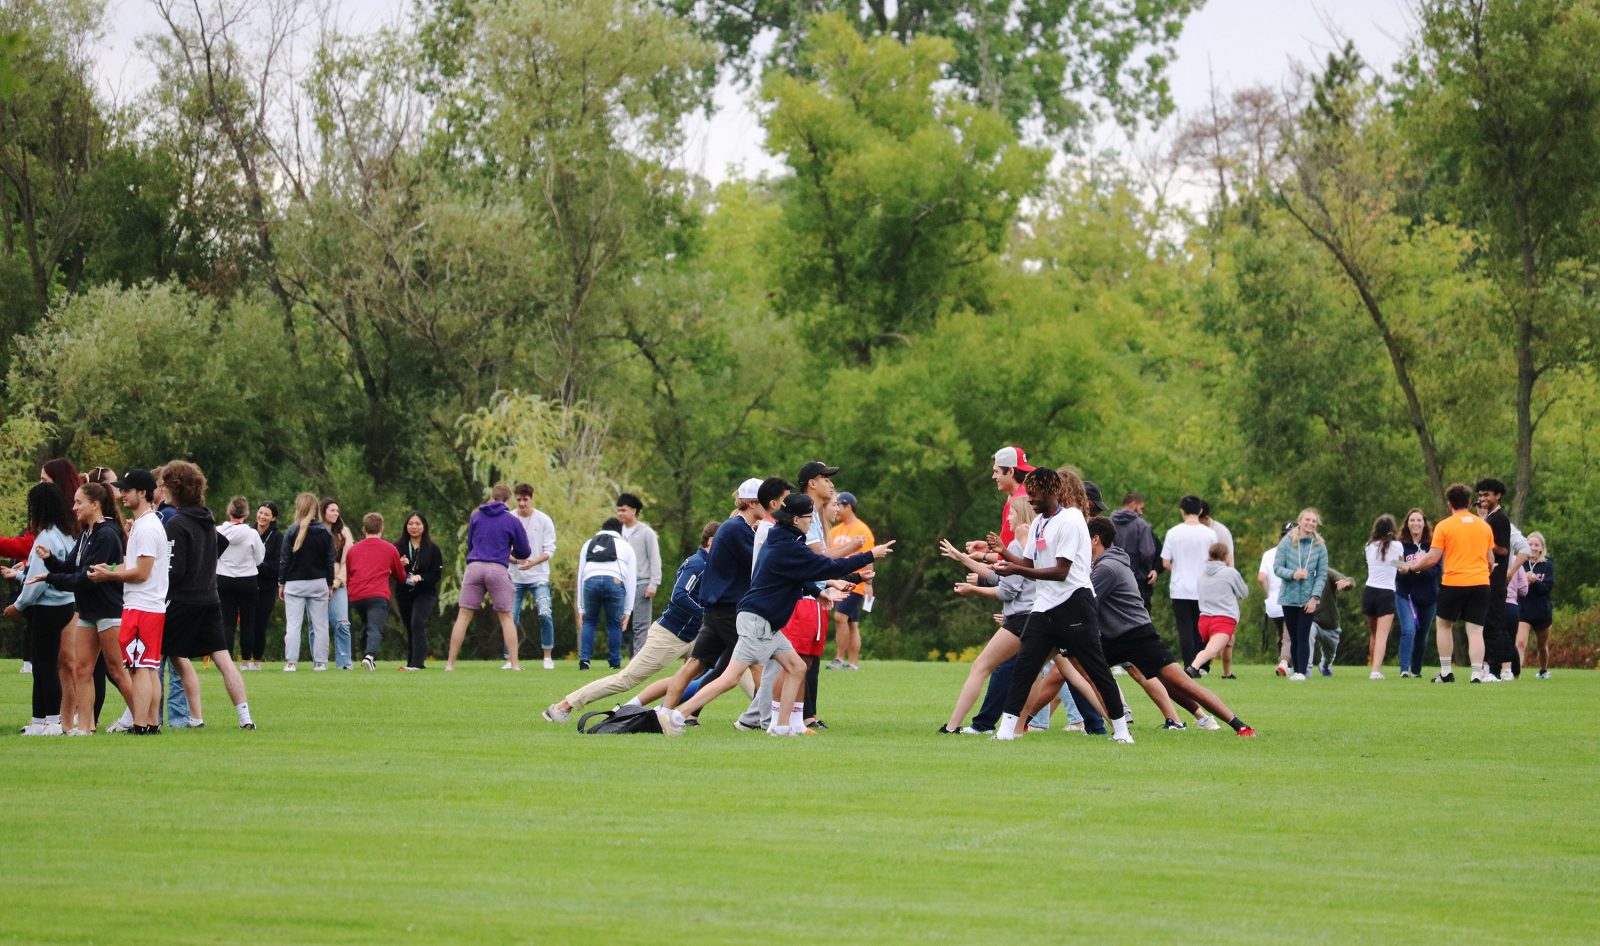 A group of people play rock, paper, scissors on a green field while facing one another.